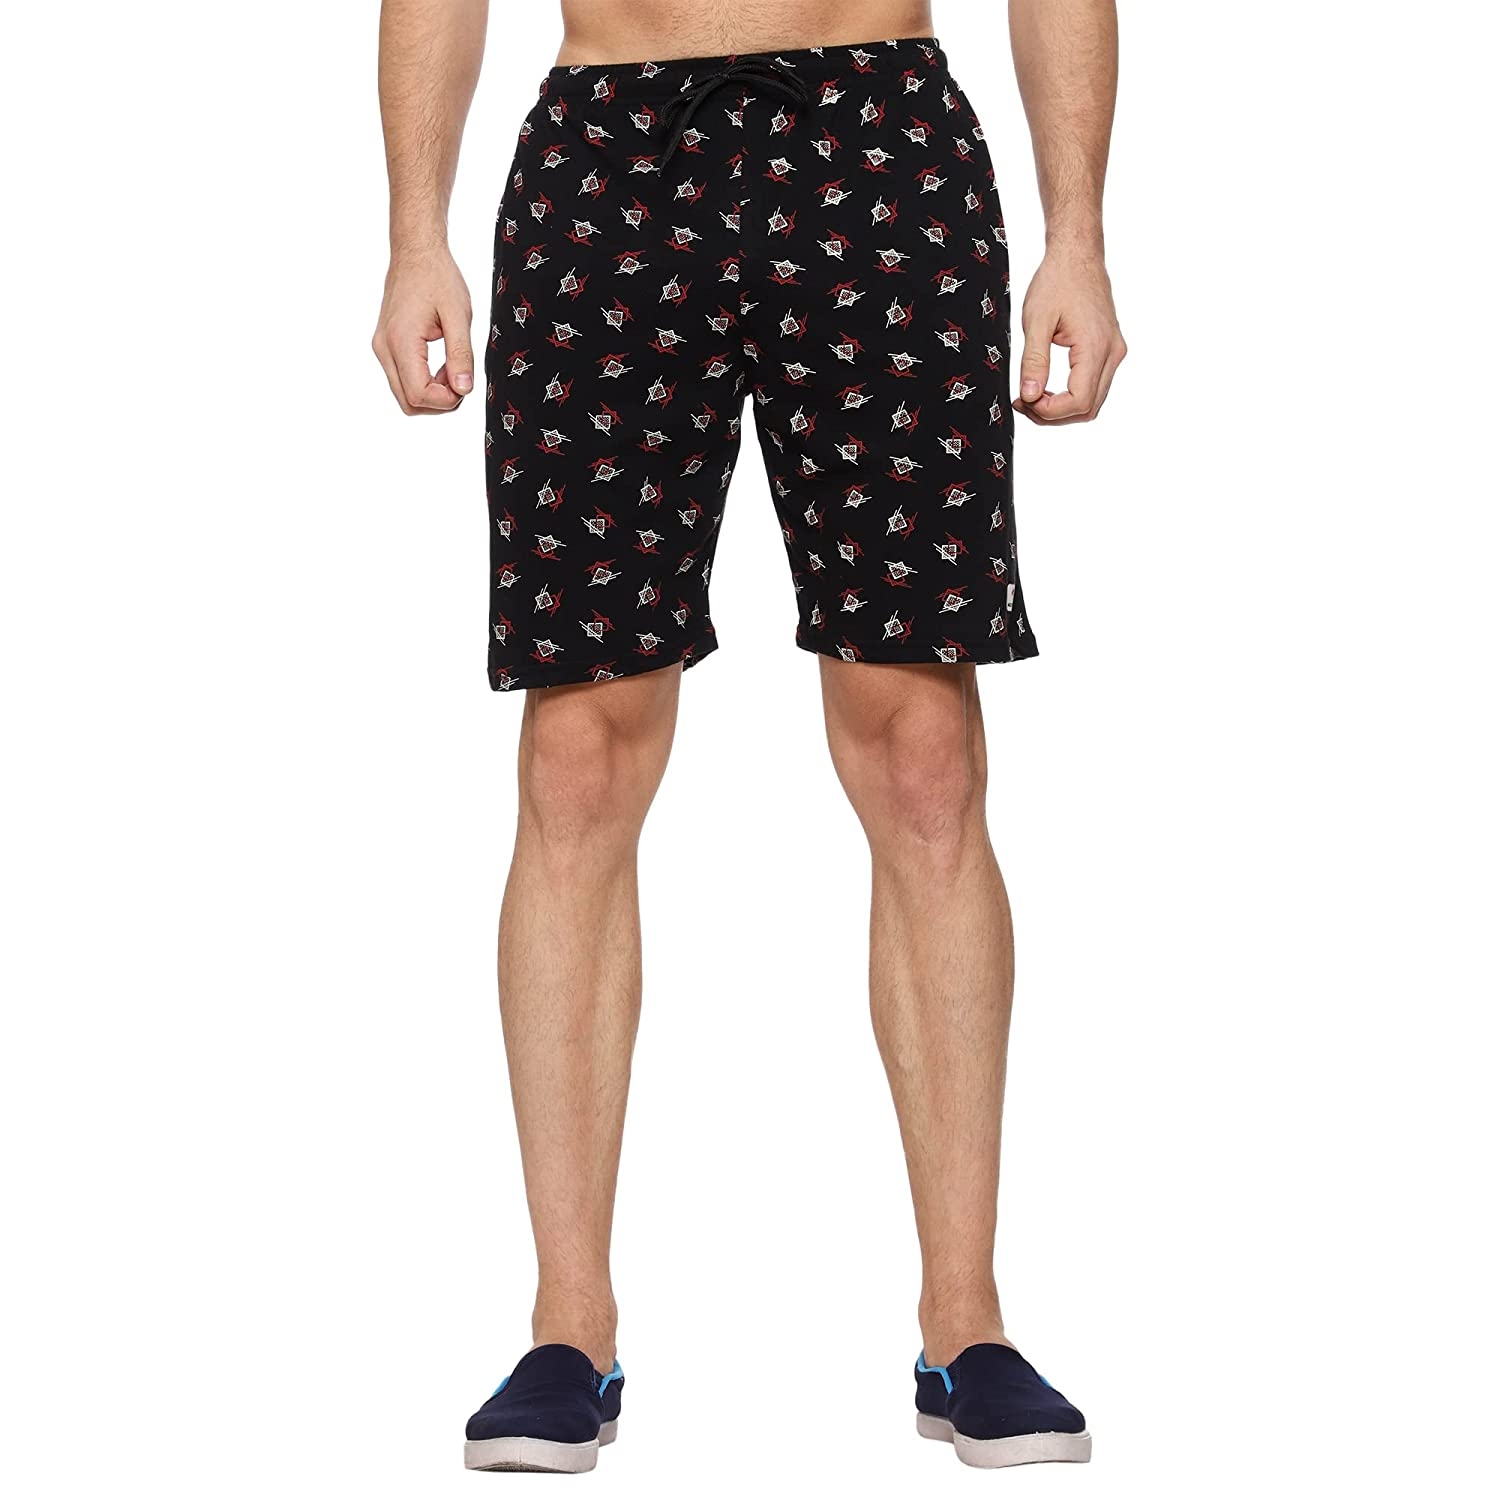 Moovfree Mens Cotton Bermuda Printed Casual Shorts Regular Fit Lounge Shorts with Zip Pockets, White Squares on Black